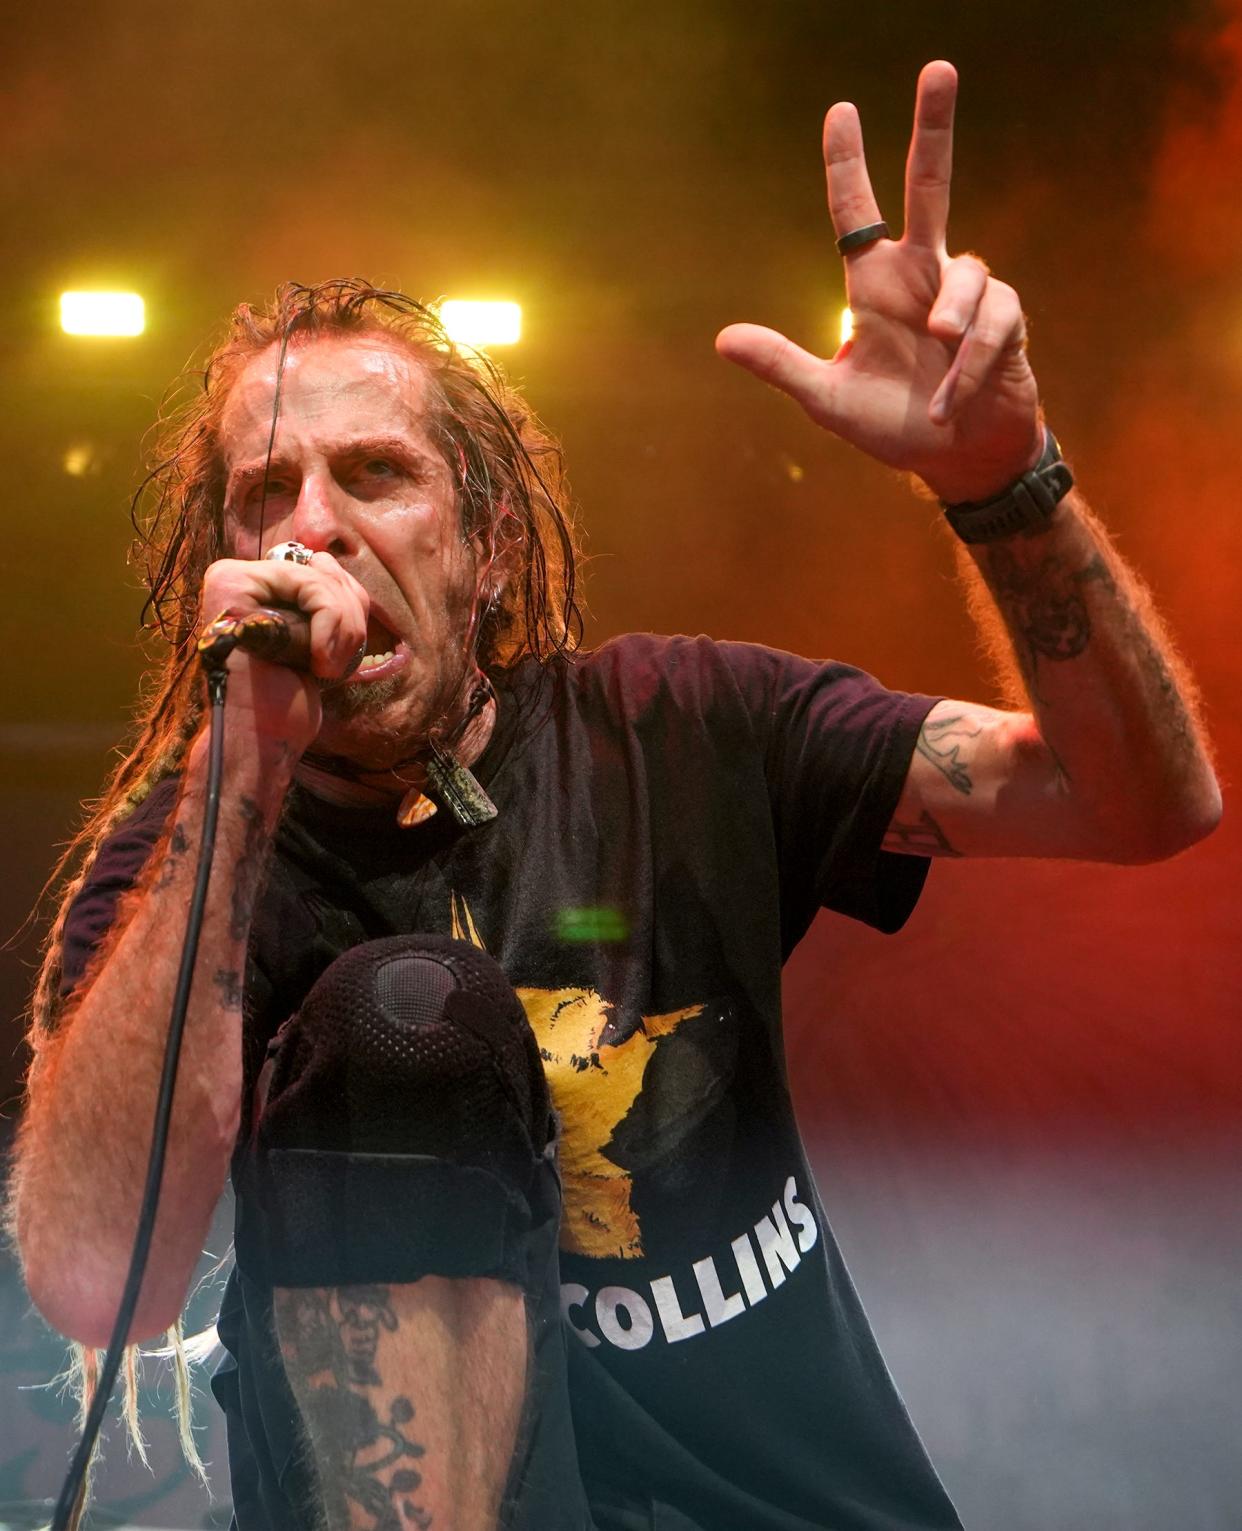 After co-headlining a Summerfest American Family Insurance Amphitheater show in 2022, Lamb of God will co-headline the return of Milwaukee Metal Fest at the Rave May 26 to 28.